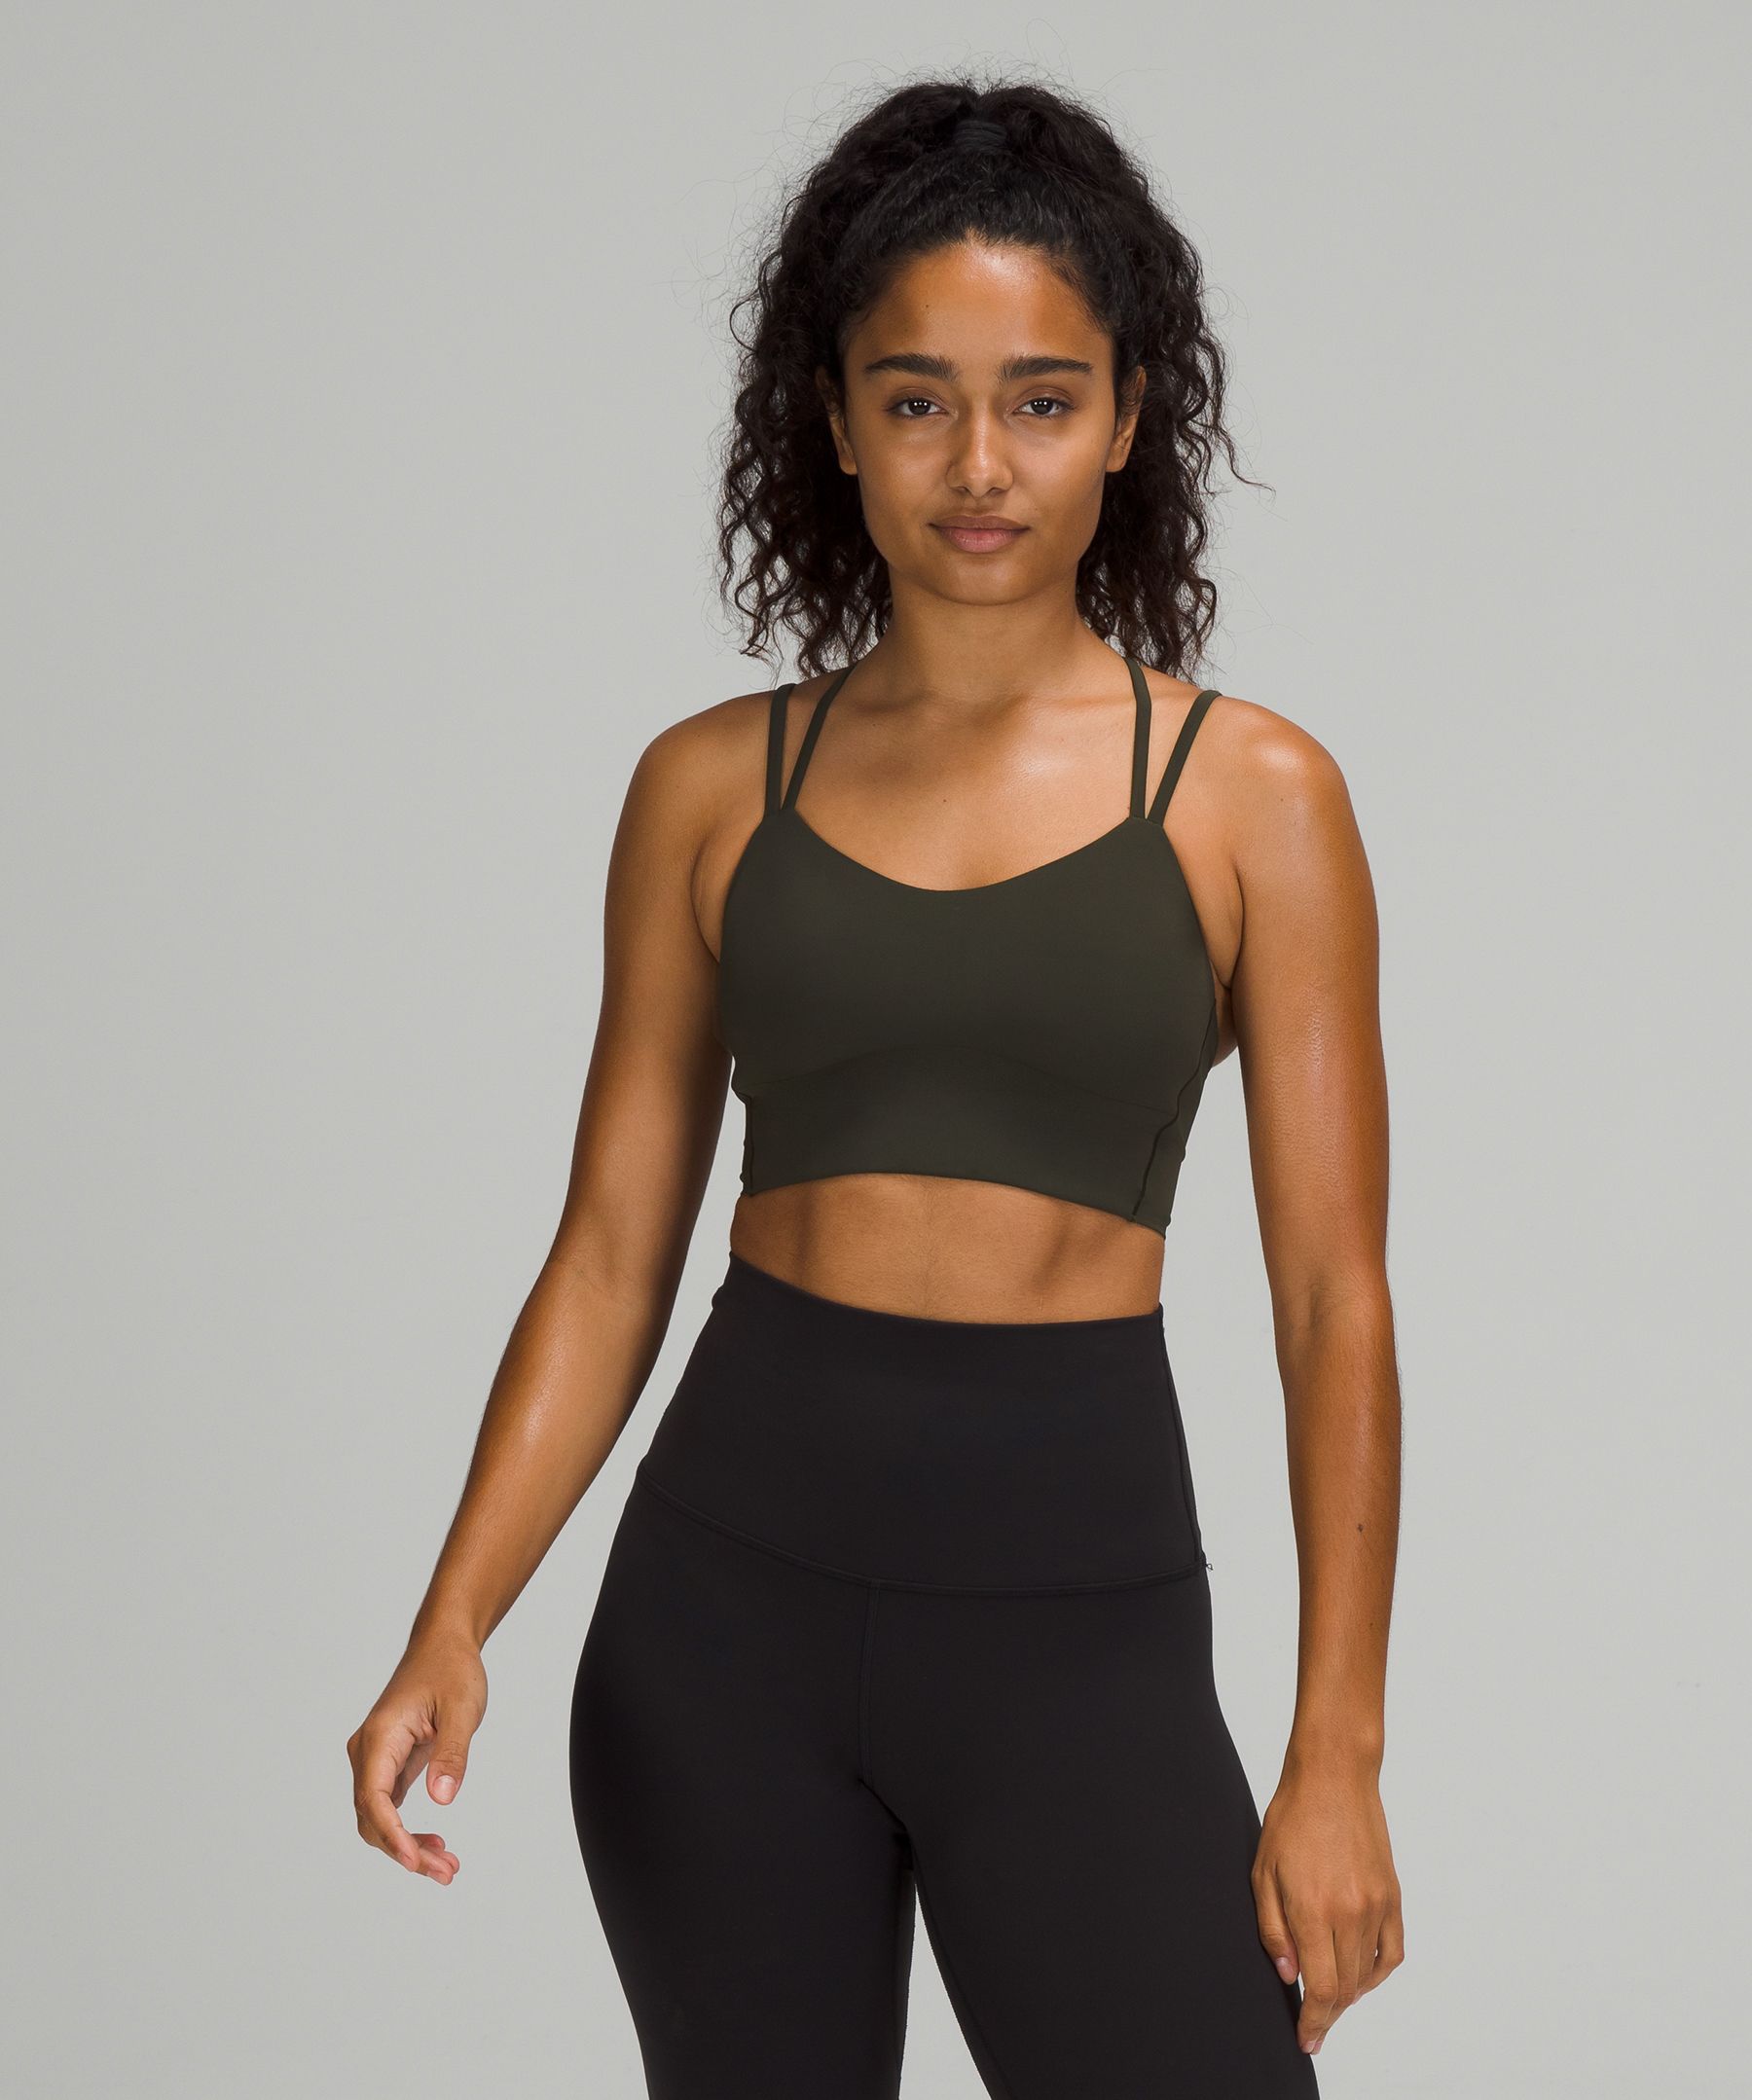 SPOTTED: Like a Cloud Bra Long Line in almond butter!! ❤️‍🔥 the almond  butter drop is comingggg : r/lululemon